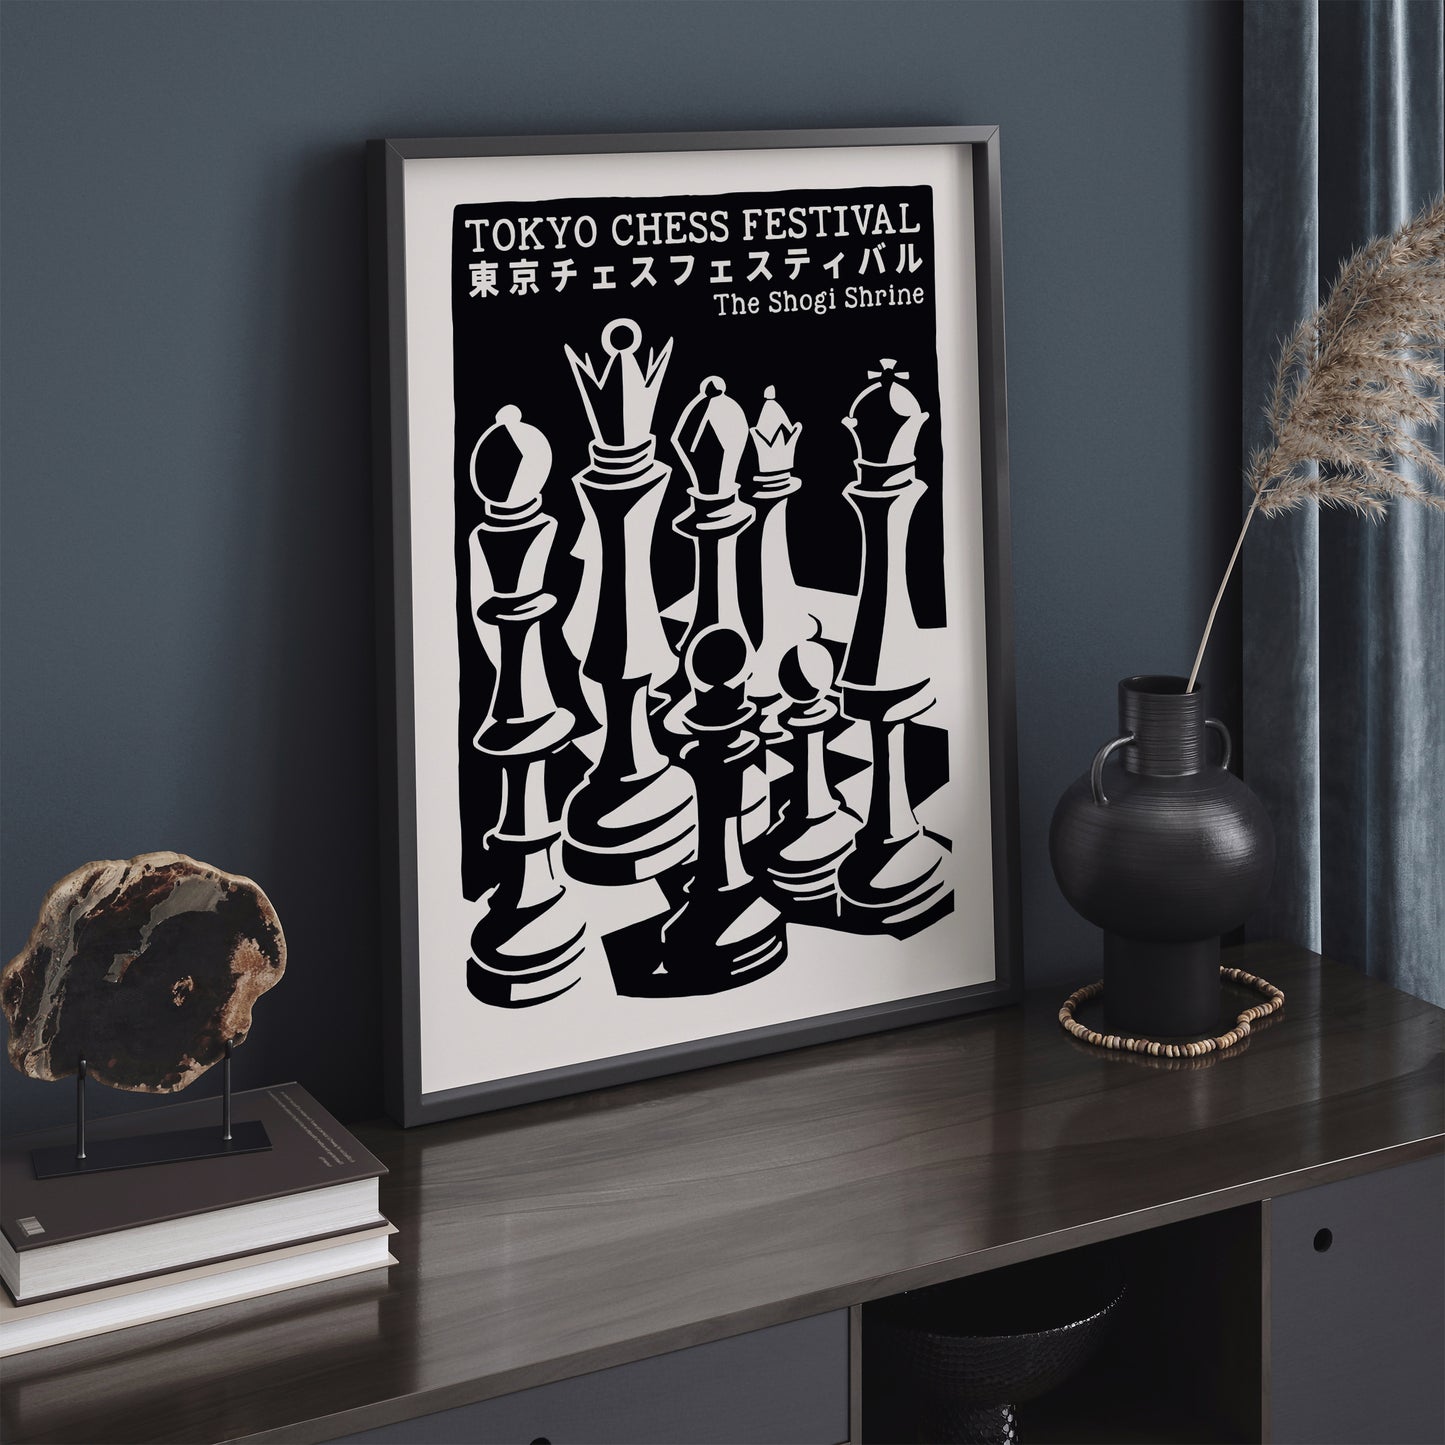 Black and White Tokyo Chess Game Festival Poster